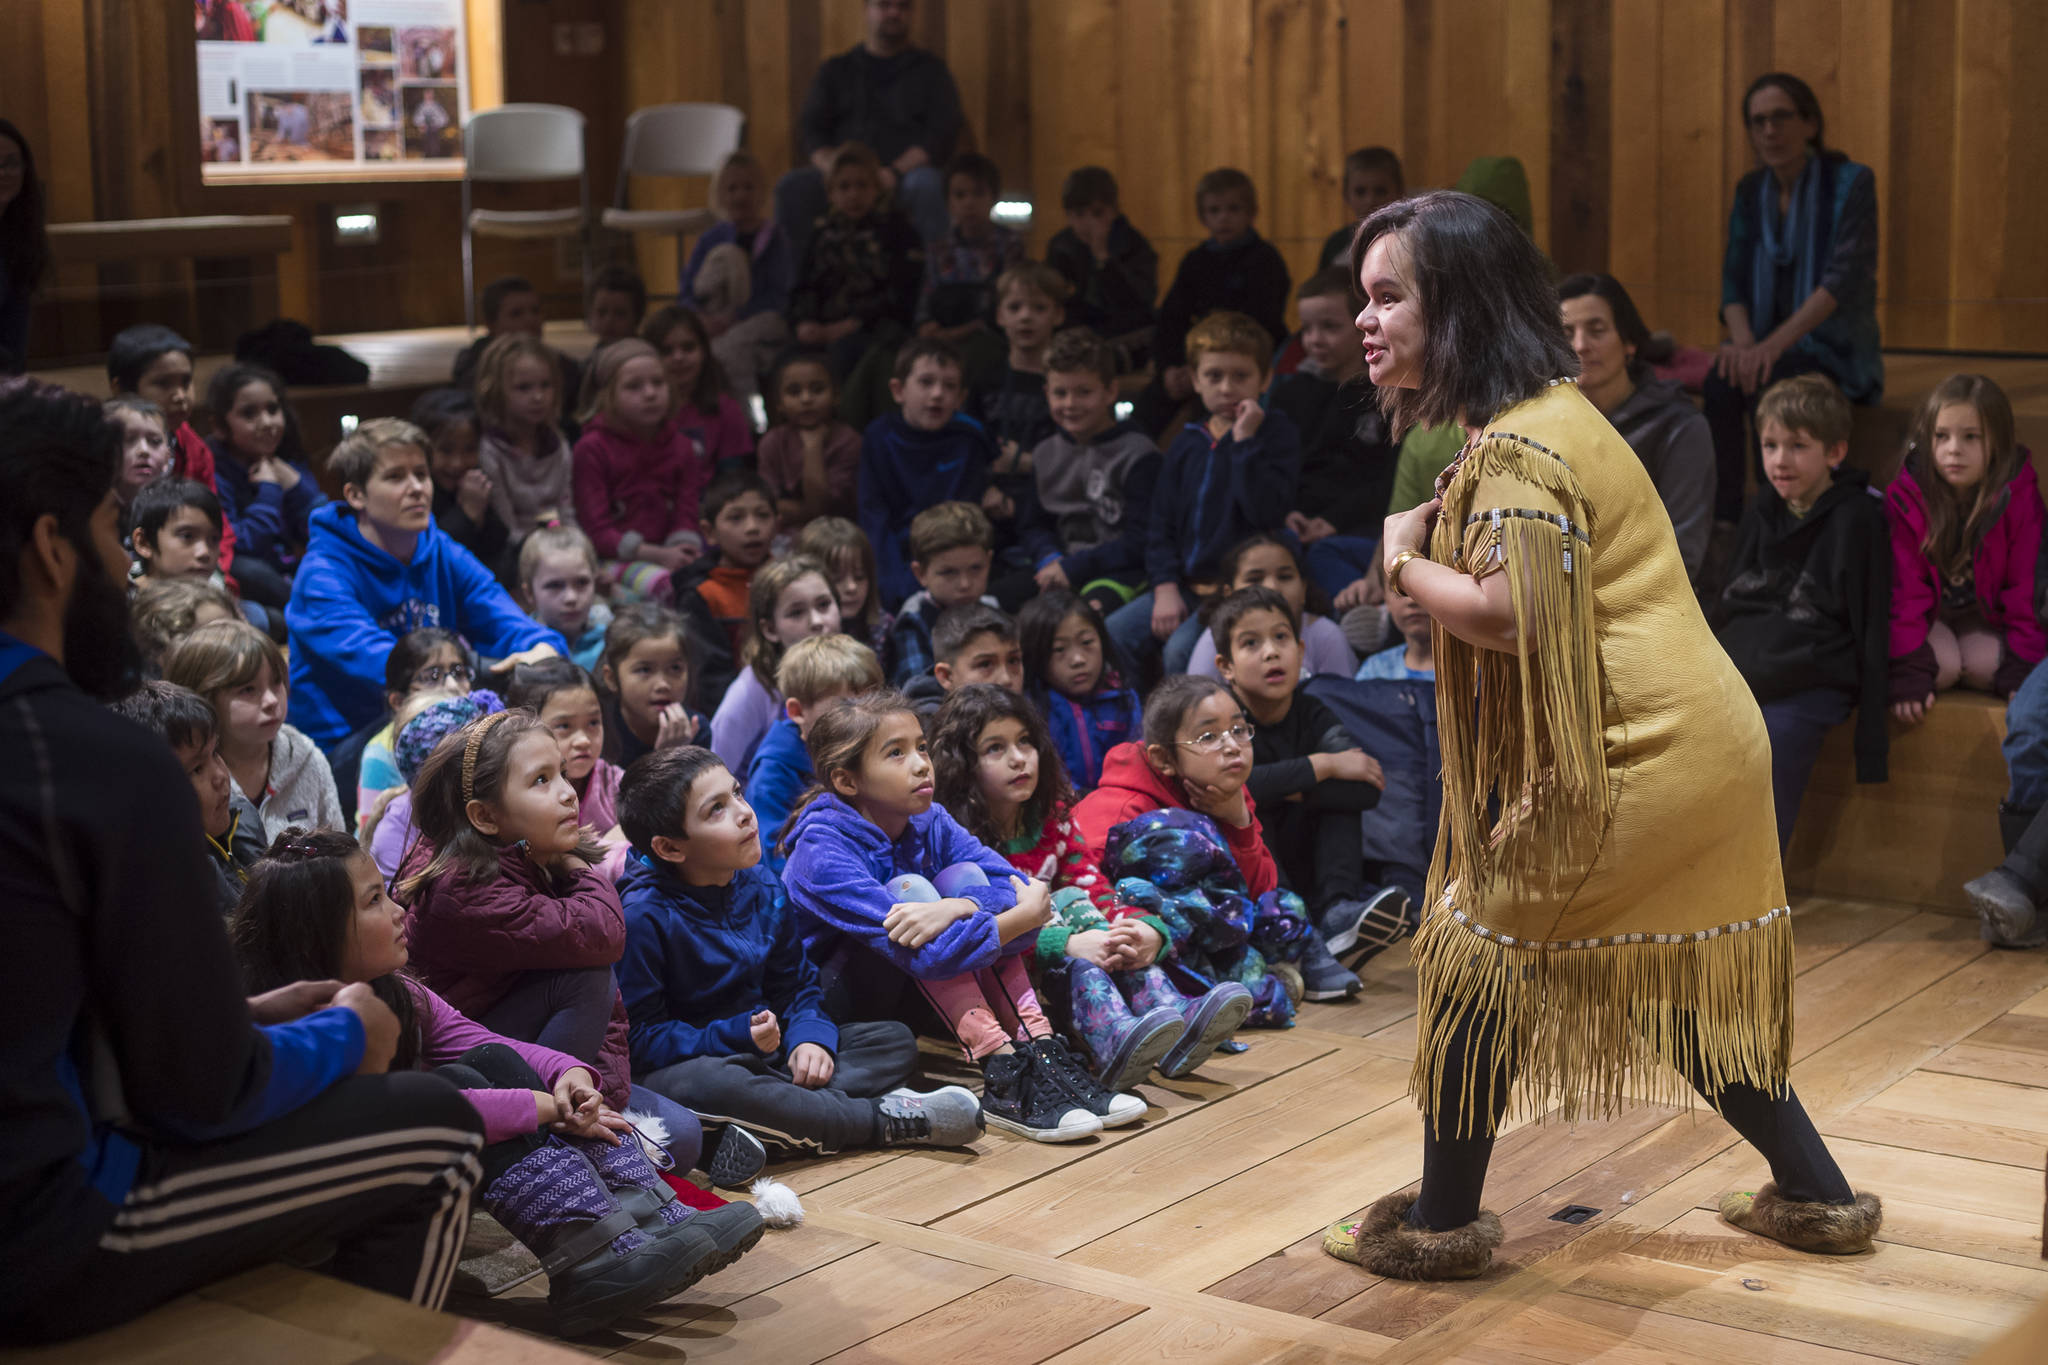 Lily Hope tells a story of raven, king salmon and the birds to second grade students from Harborview Elementary, Montessori Borealis and Juneau Charter Community School at the Walter Soboleff Center on Friday Nov. 30, 2018. The Storytelling Excursion for all Juneau School District second graders is part of the Any Given Child programming sponsored by the Juneau School District, Mayor’s office, University of Alaska Southeast, Sealaska Heritage Institute and the Juneau Arts and Humanities Council. (Michael Penn | Juneau Empire)